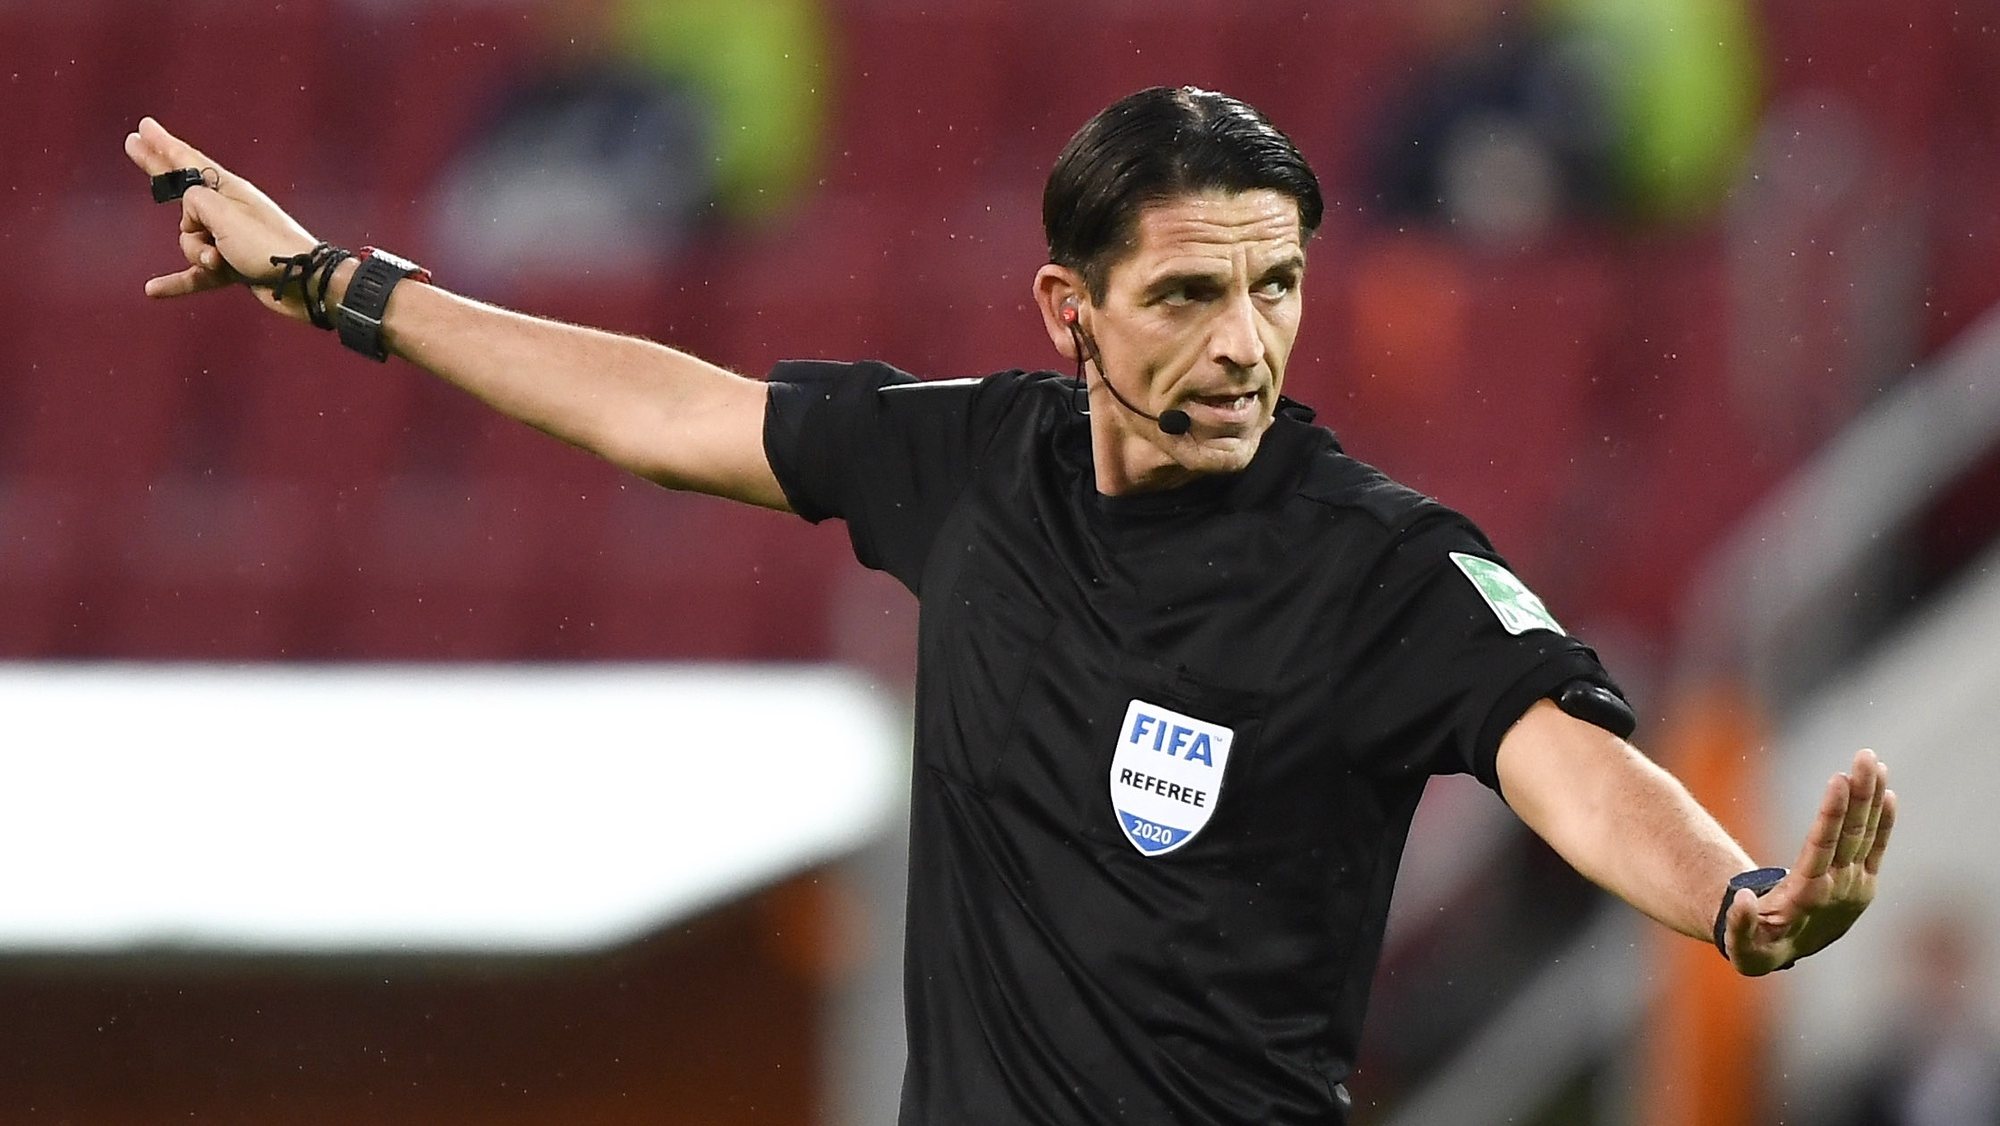 epa08491738 Referee Deniz Aytekin gestures during the German Bundesliga soccer match between FC Augsburg and TSG 1899 Hoffenheim in Augsburg, Germany, 17 June 2020.  EPA/LUKAS BARTH-TUTTAS / POOL CONDITIONS - ATTENTION:  The DFL regulations prohibit any use of photographs as image sequences and/or quasi-video.